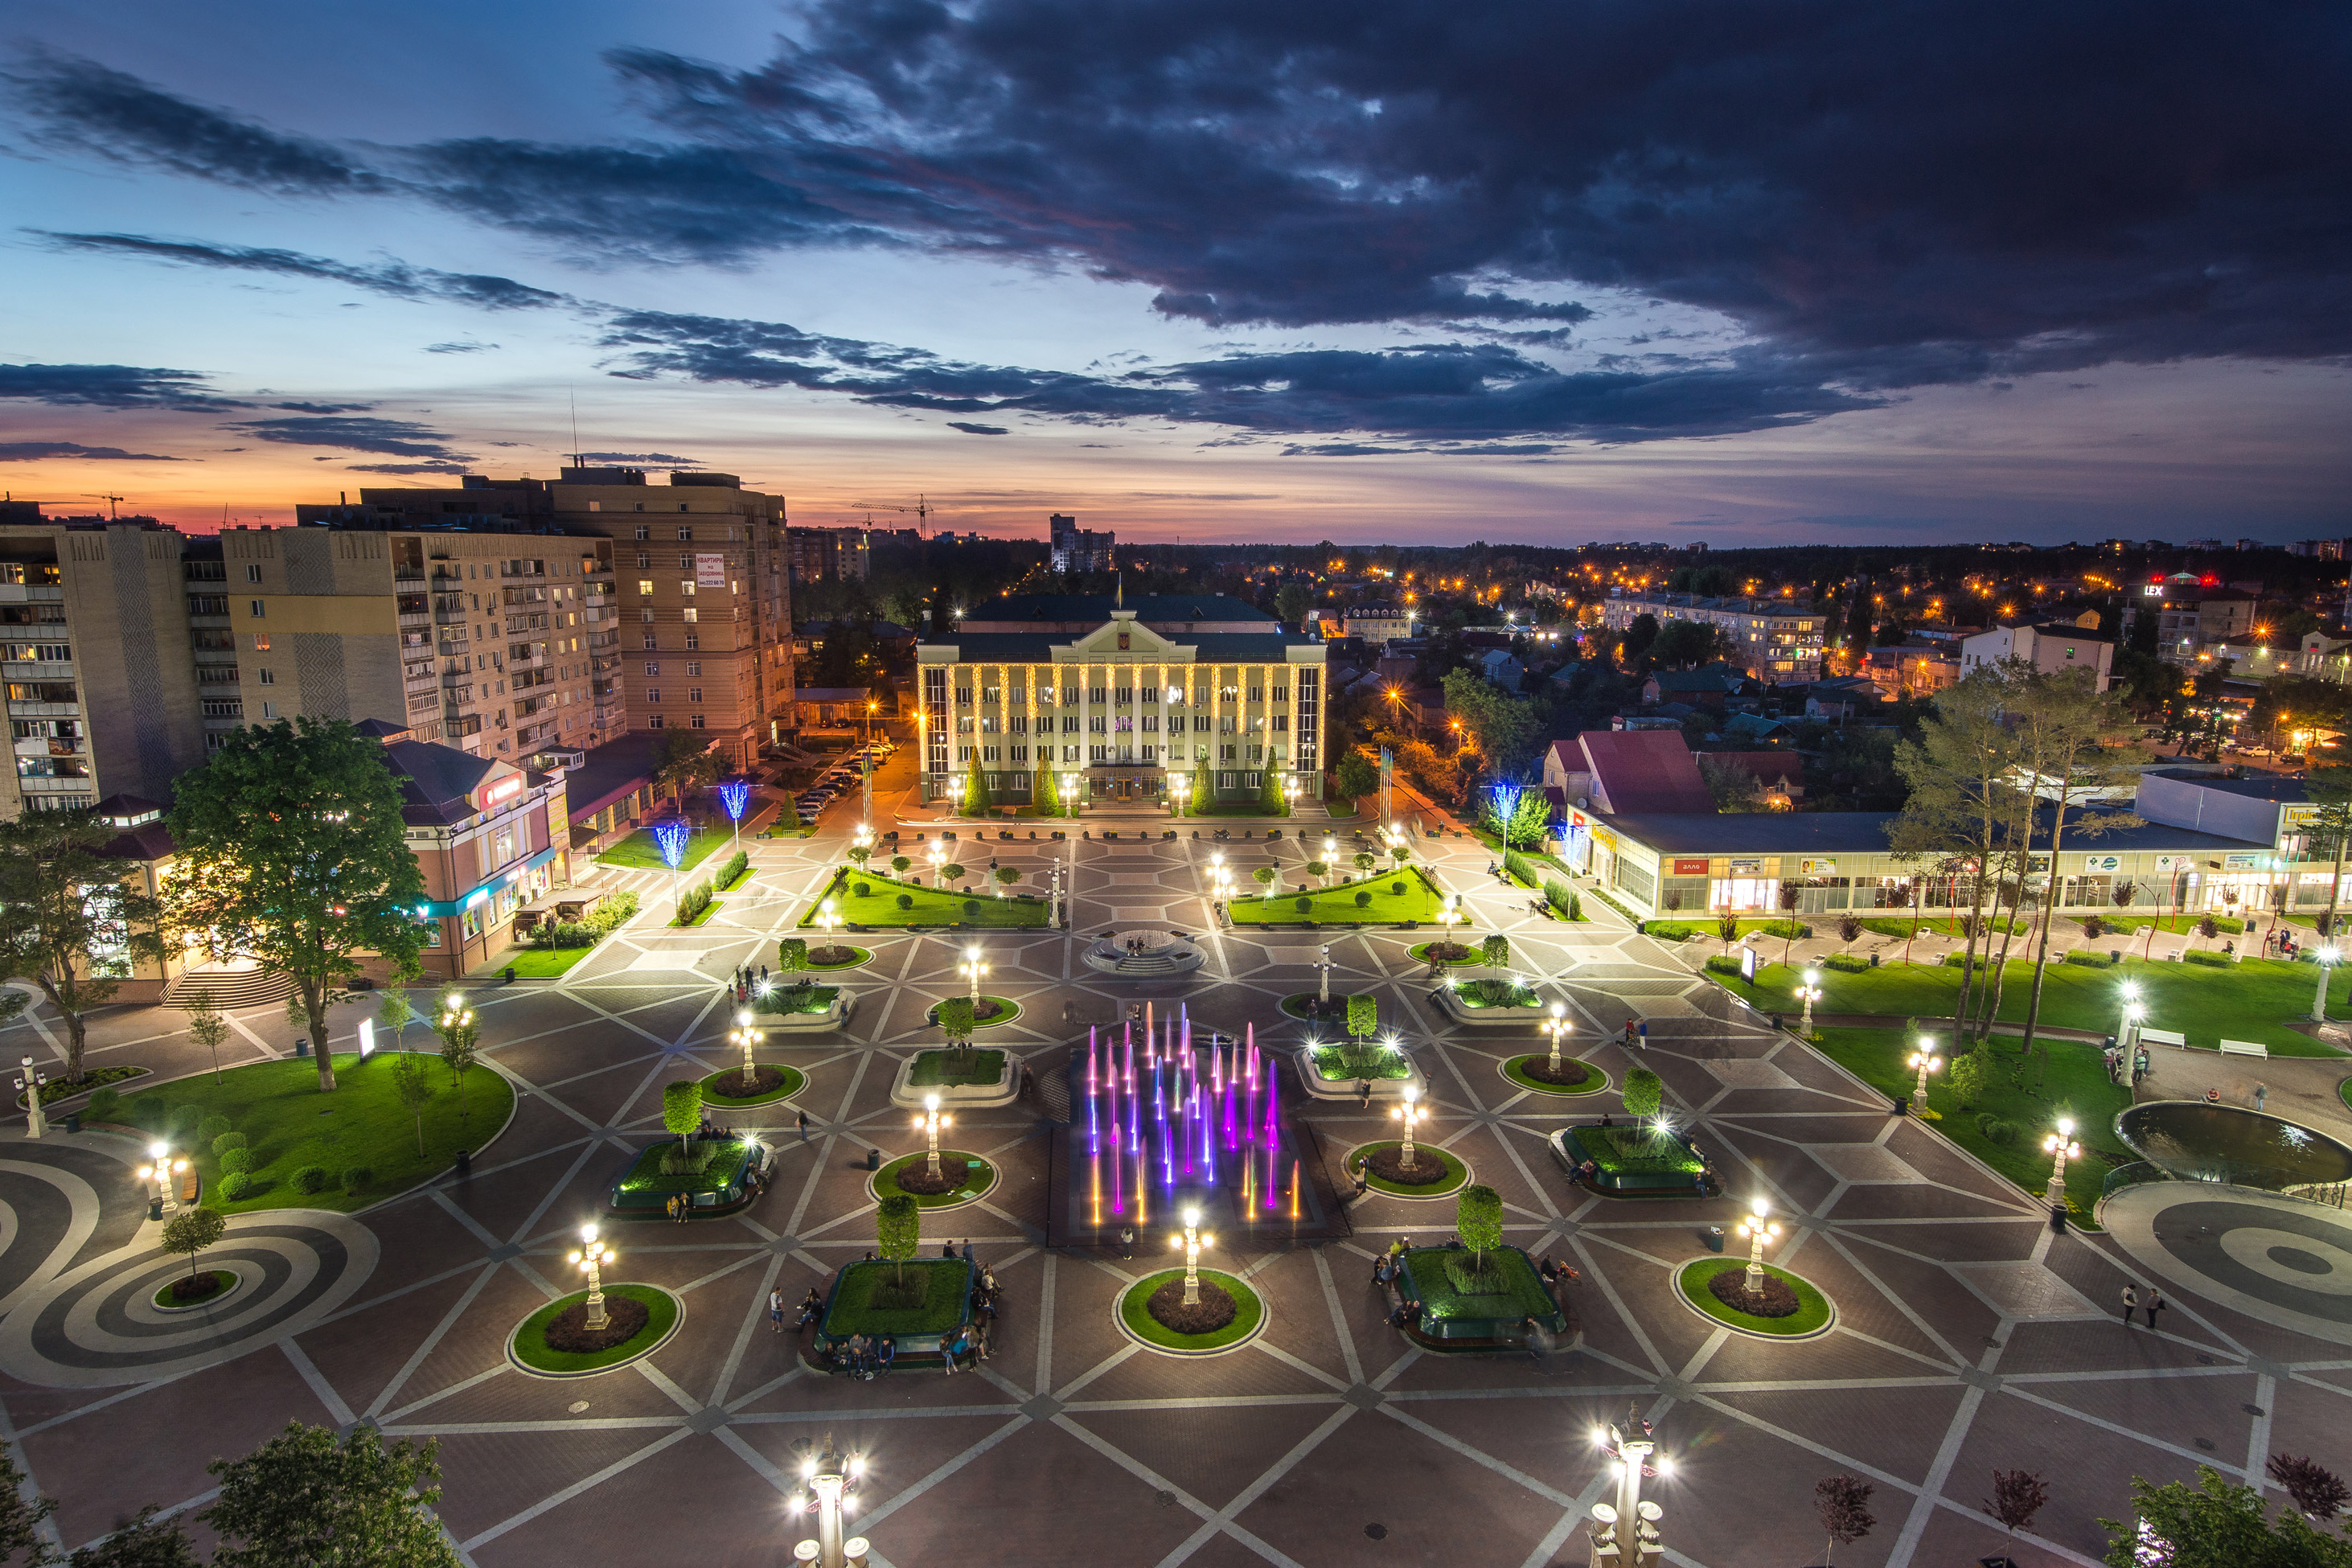 Dusk overlooking a landscaped plaza with green grass areas, ornate lamp posts and a colorful fountain